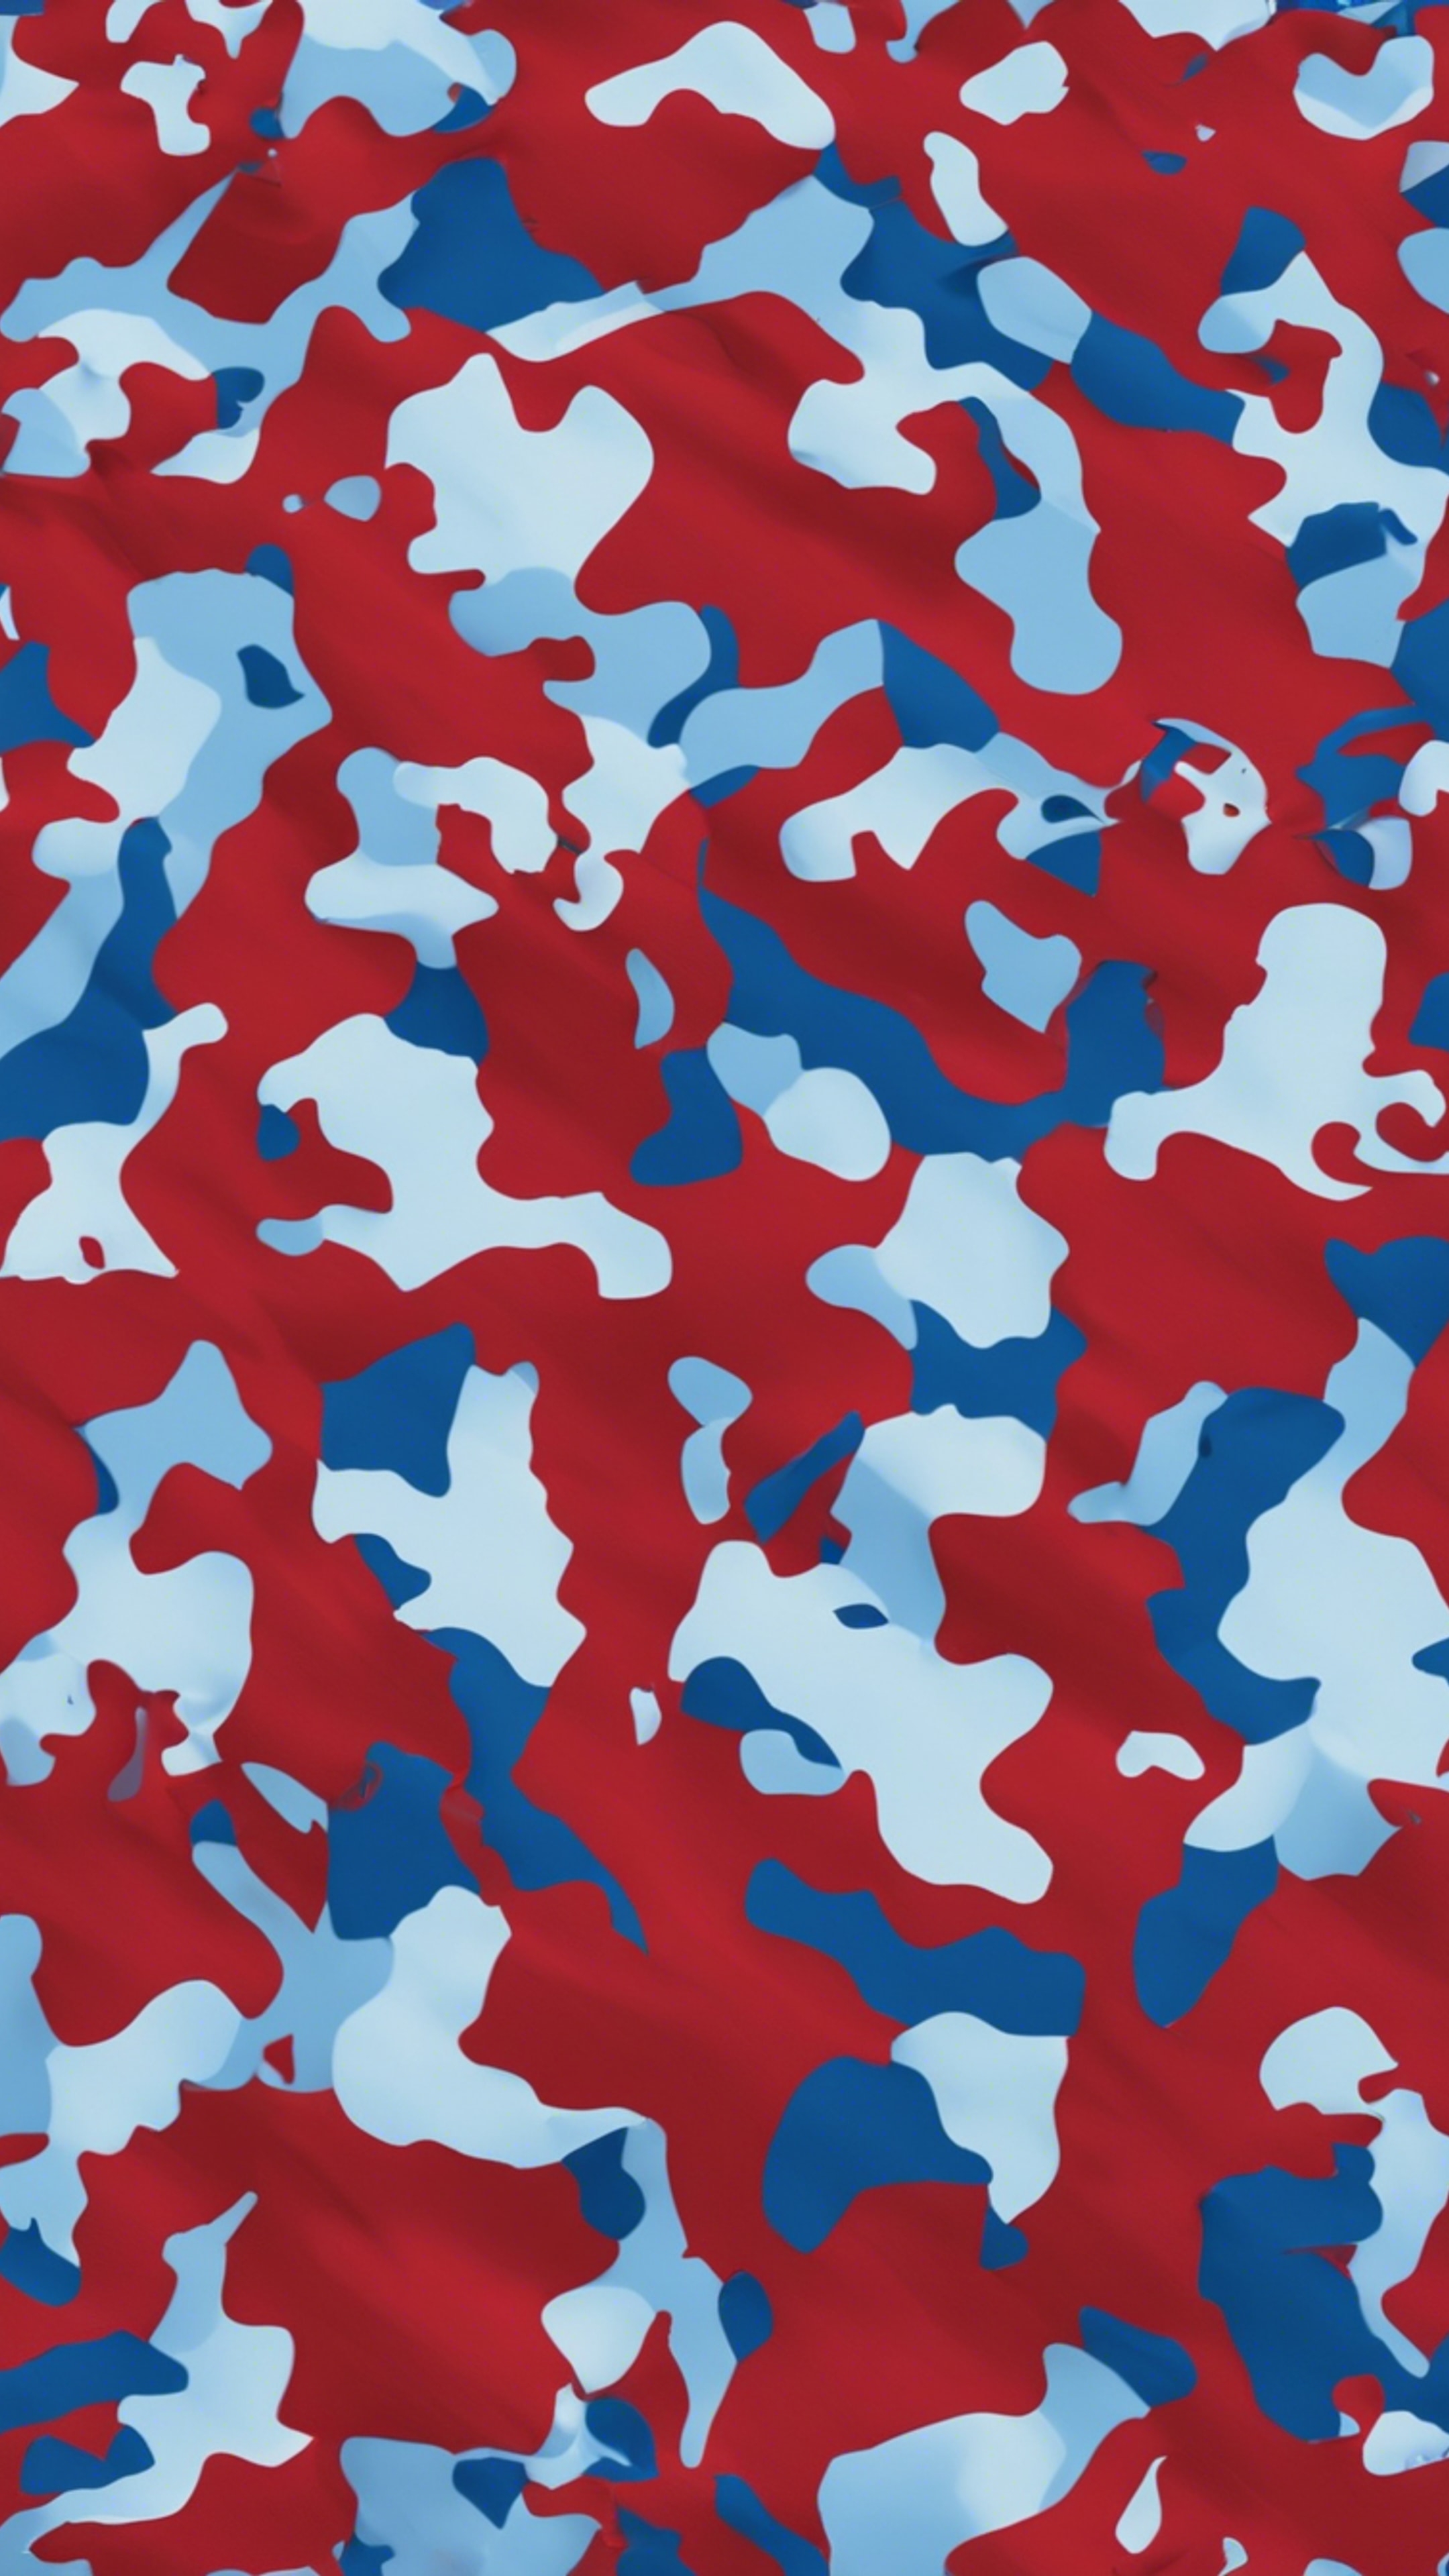 A seamles pattern of red and blue camouflage. Ταπετσαρία[edd7b72010f24e93b1c5]